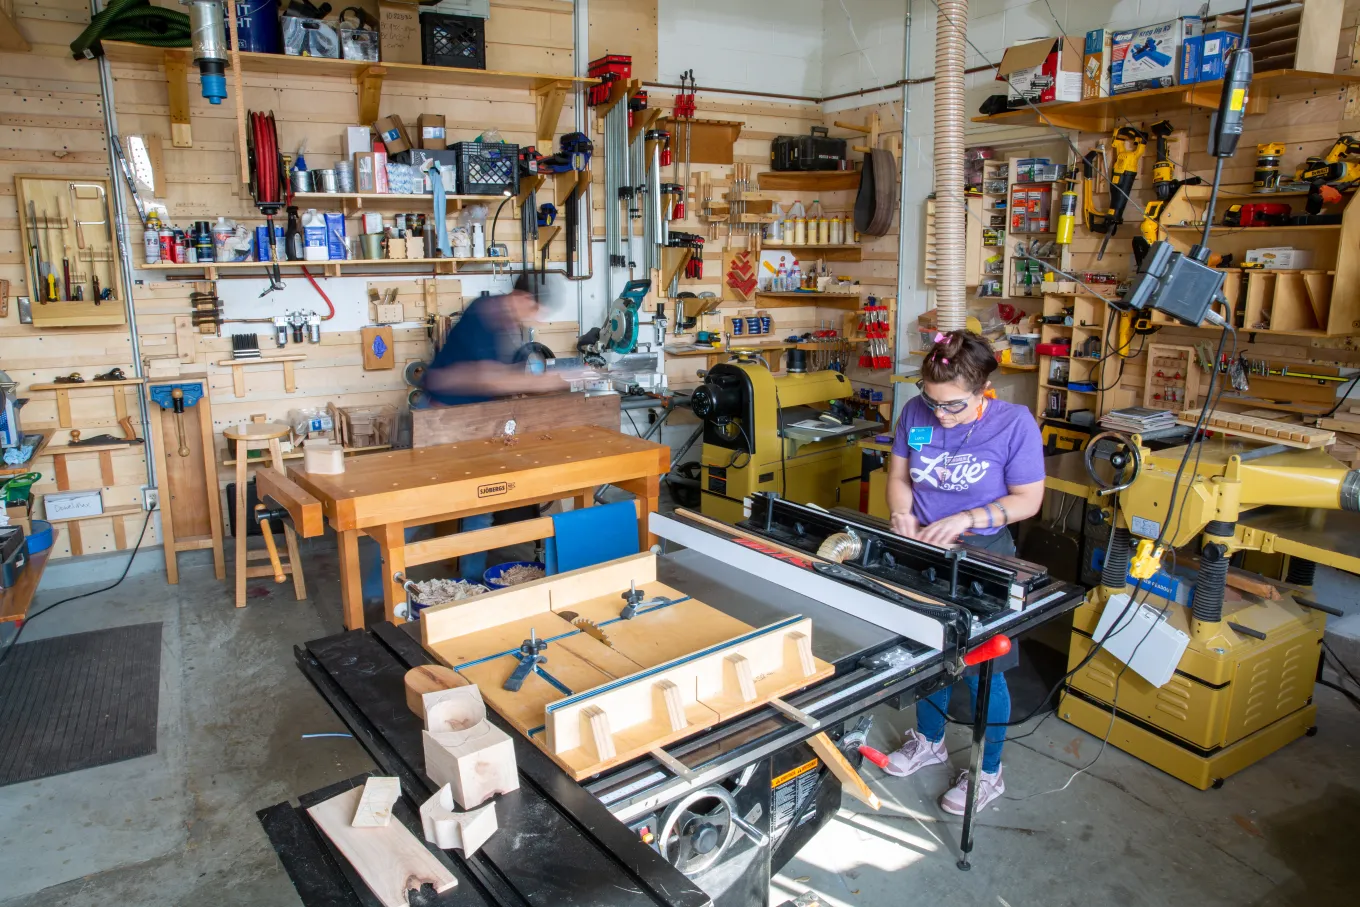 Two staff members--one male, one female--work on projects in the Fabrication Studio